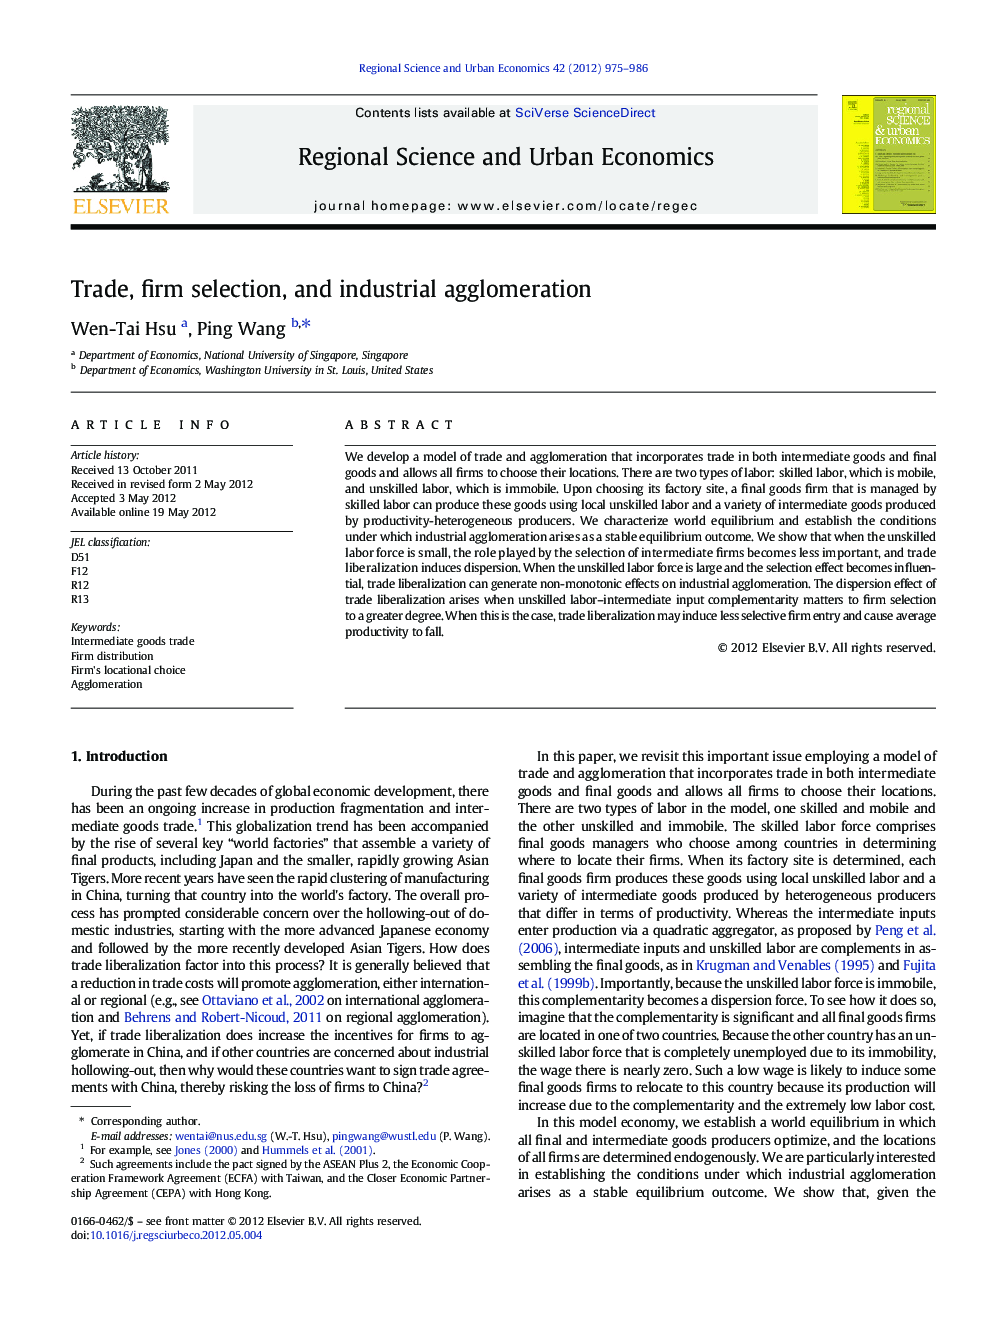 Trade, firm selection, and industrial agglomeration